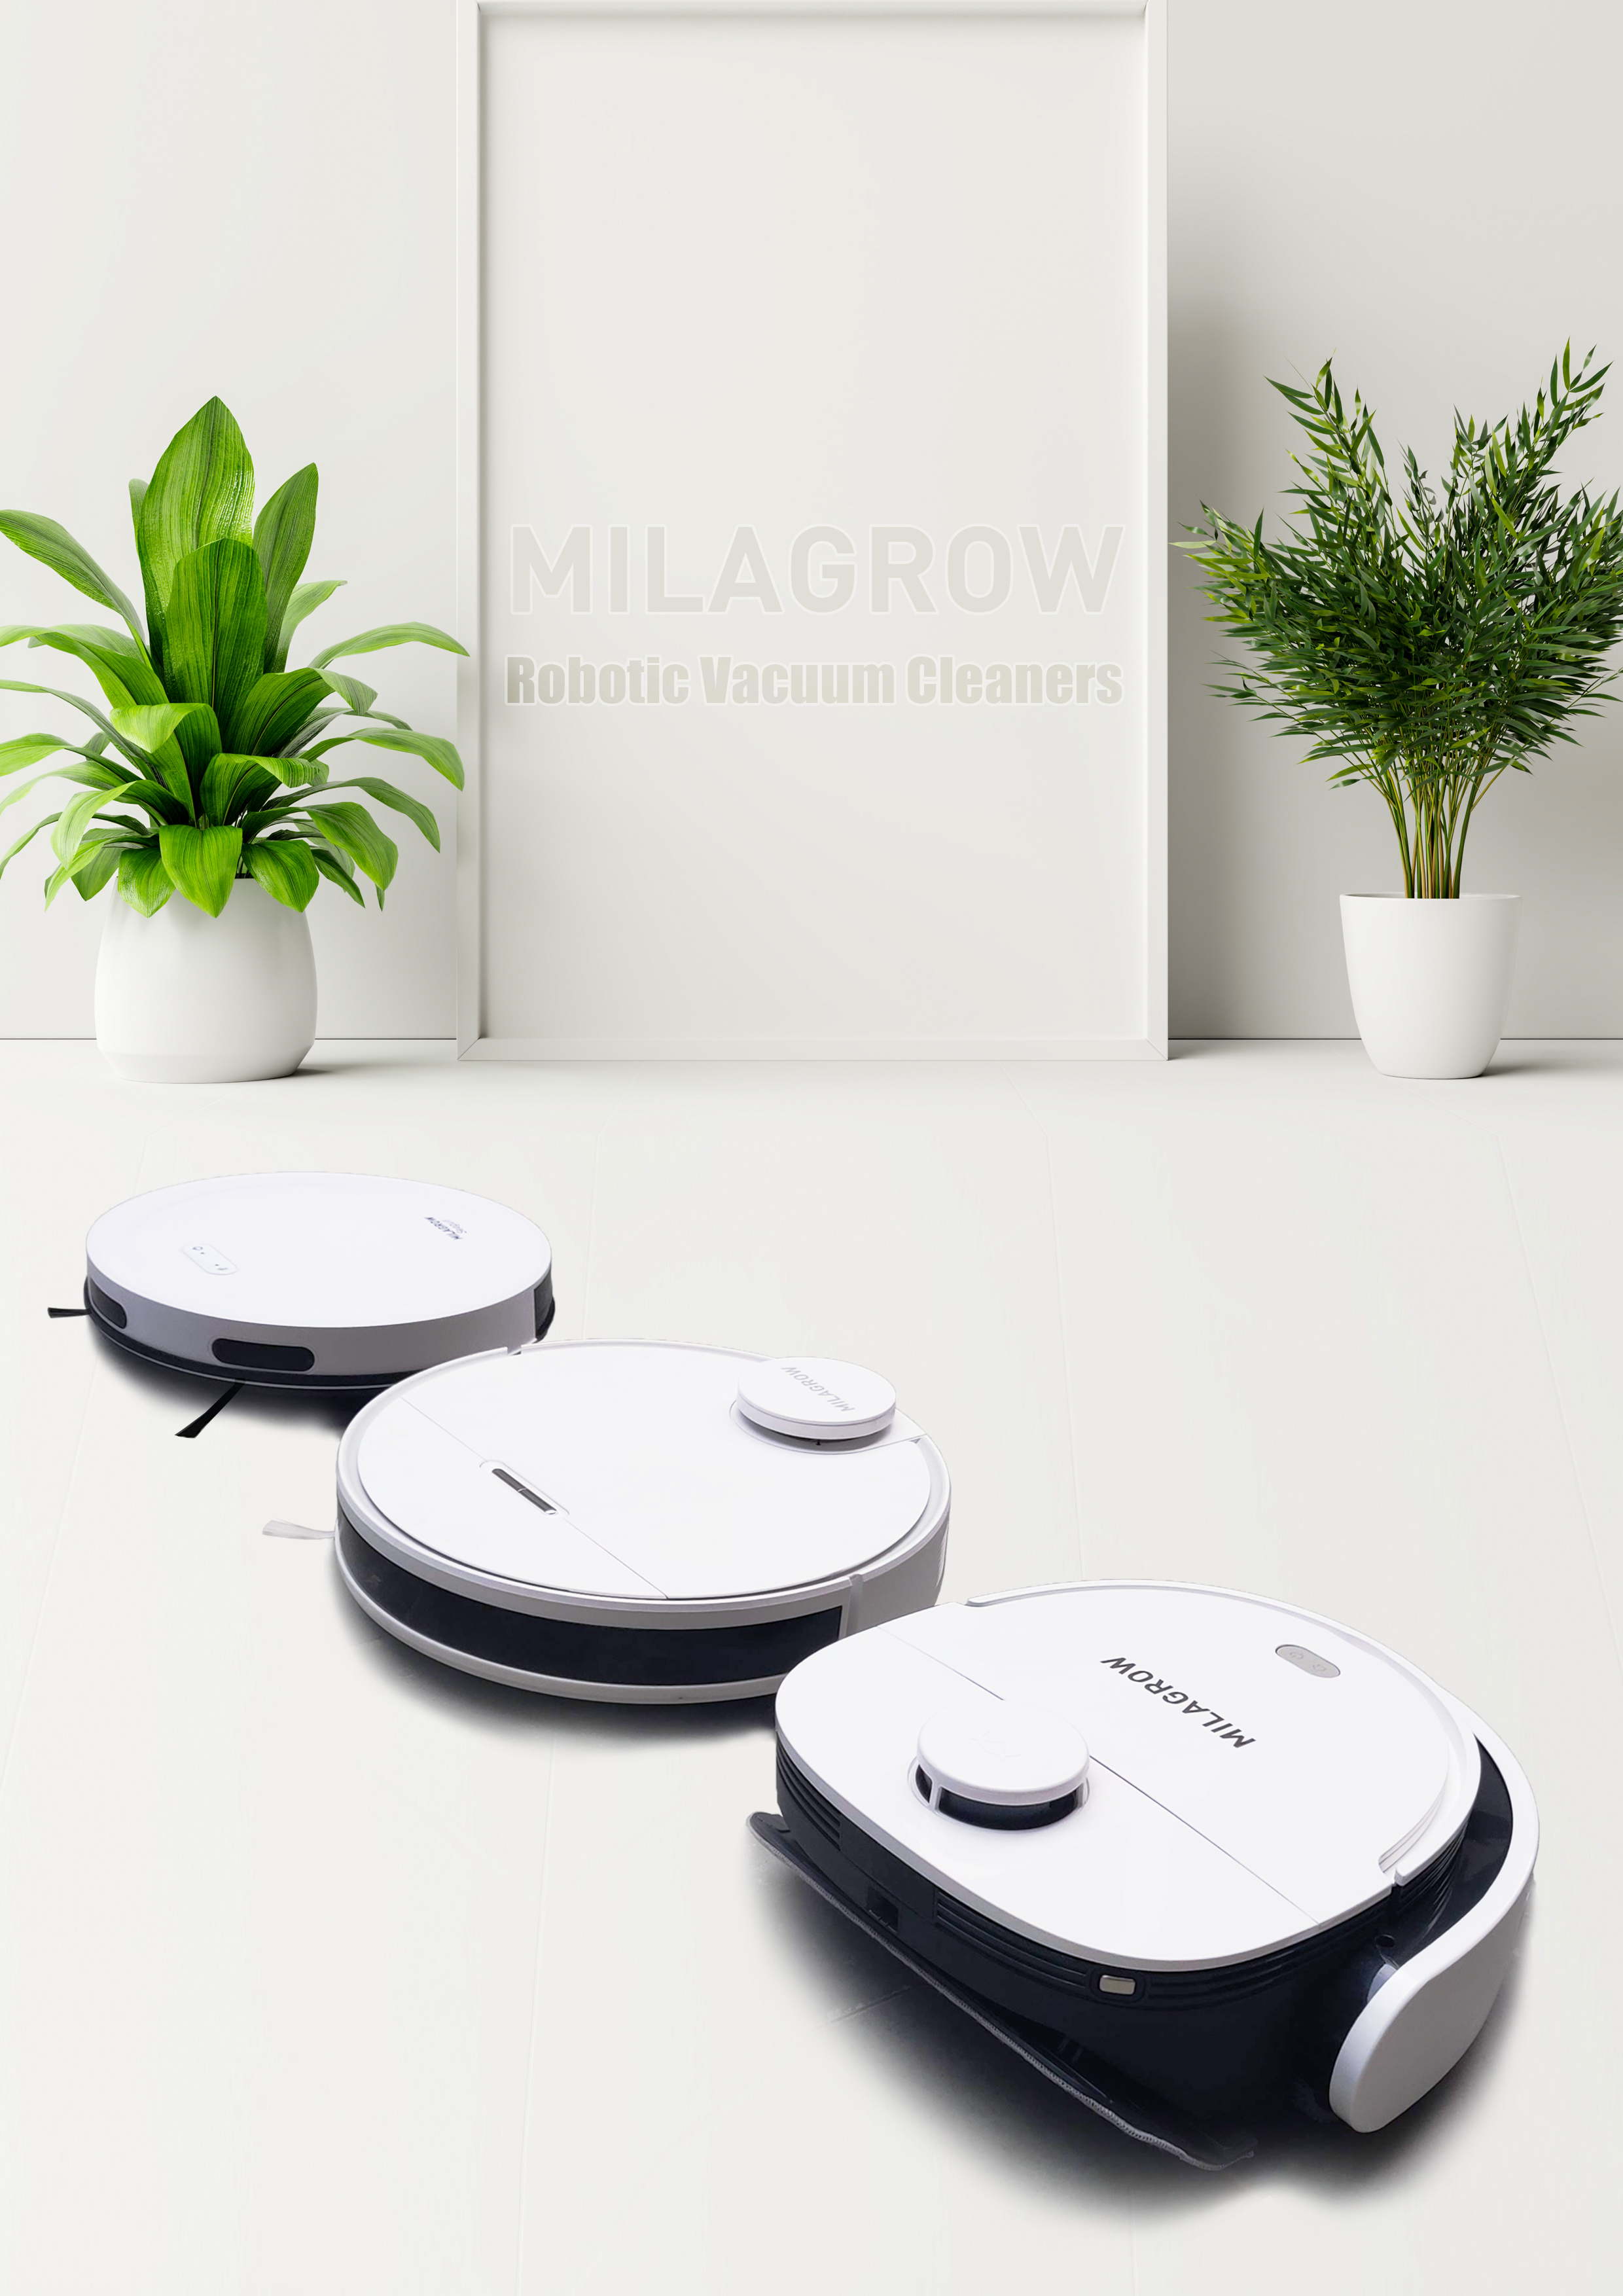 Milagrow Launches World’s First Robotic Vacuum Cleaner, 3 New Floor Robots with Independent Navigation Features on Amazon Prime Days (6th and 7th Aug)